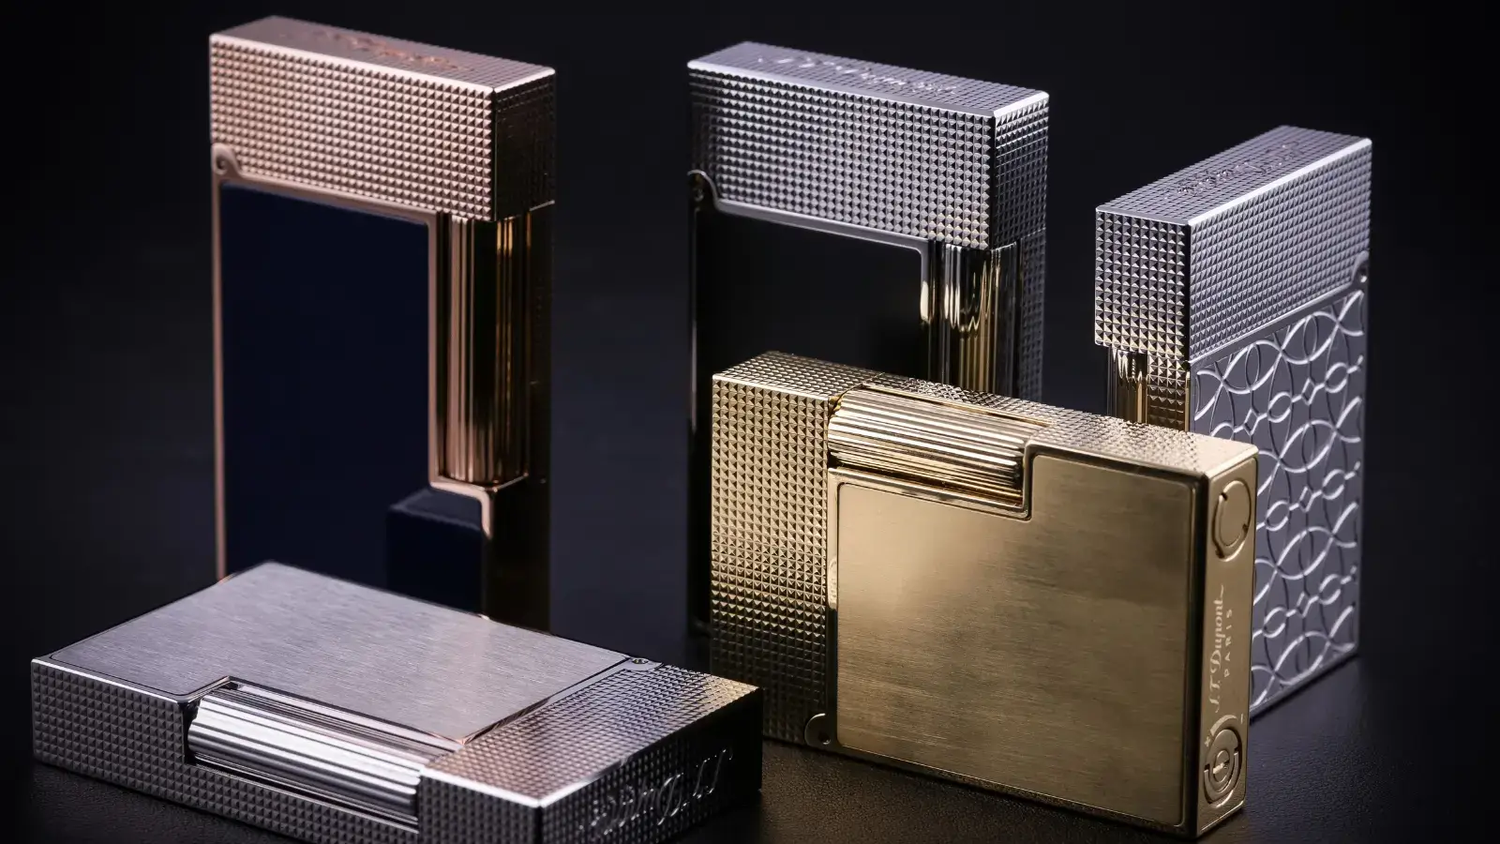 S.T. Dupont Ligne 2 Perfect Ping lighters with diamondhead guilloche with Gold, Palladium and Rose Gold finishes.